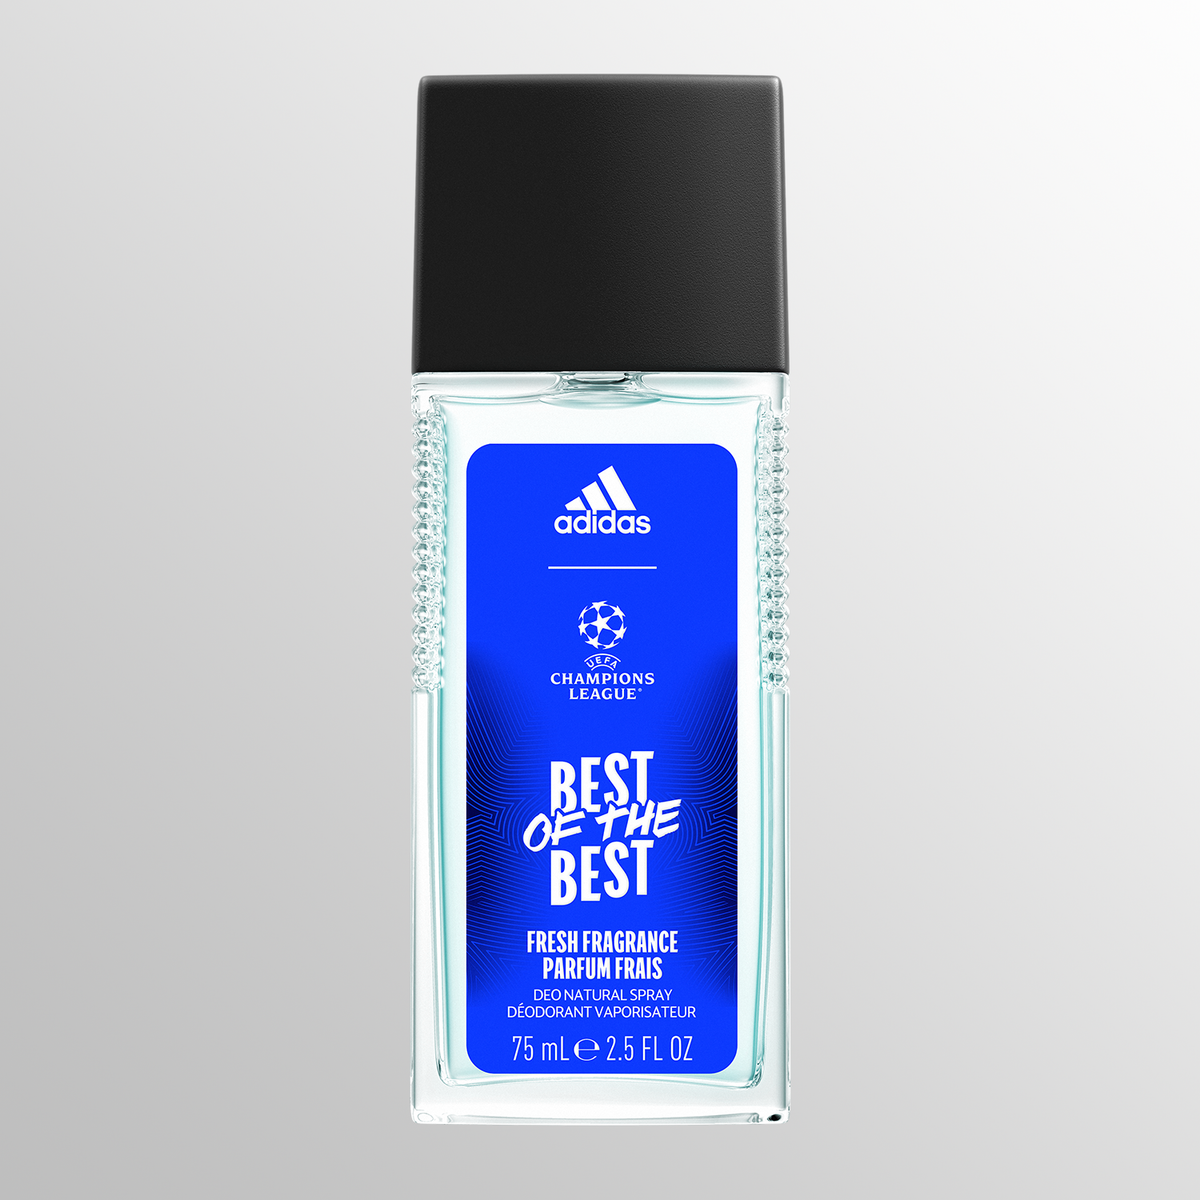 Adidas UEFA Best of the Best Deo Spray Naturale 75ml